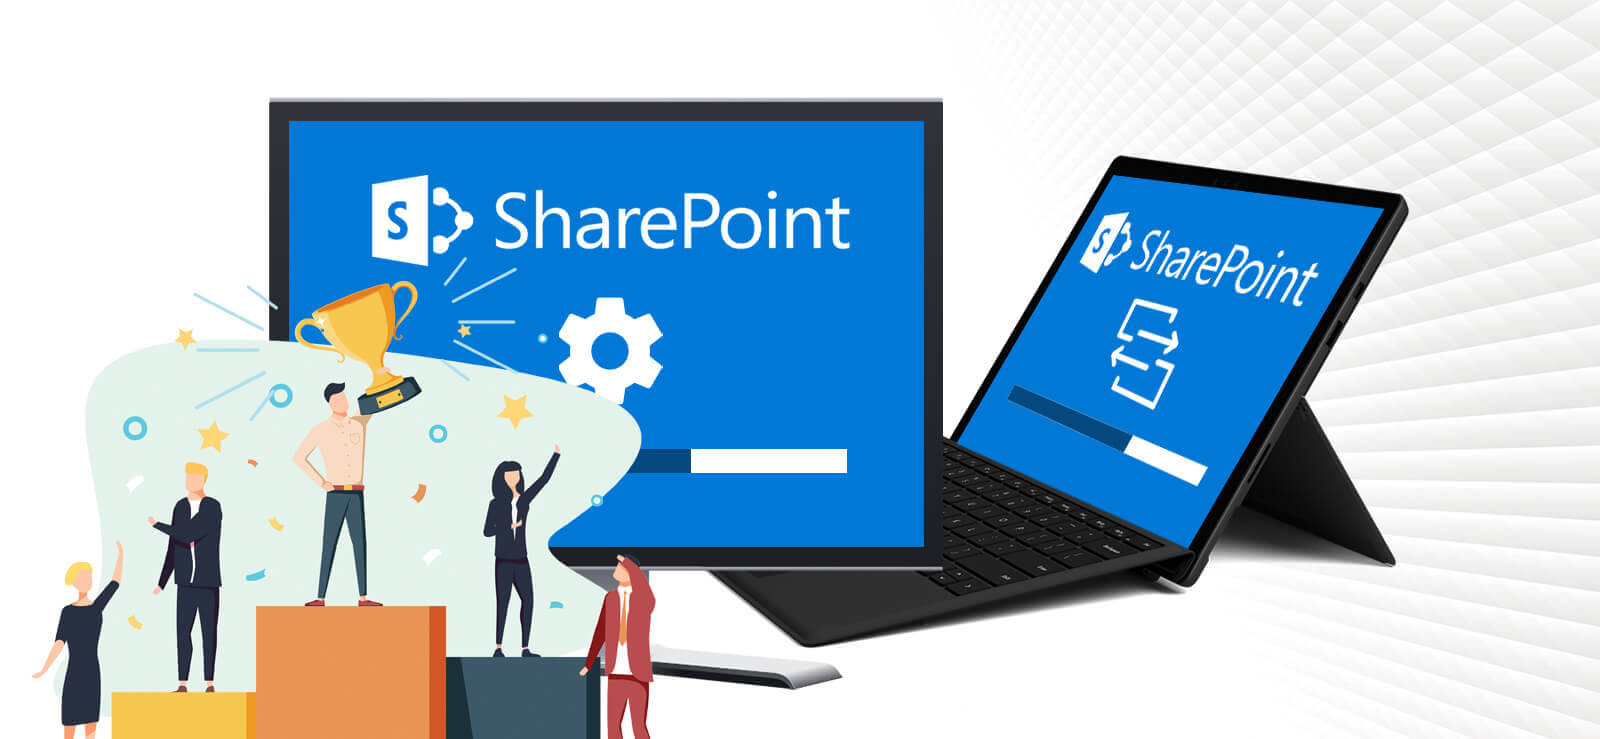 SharePoint, a collaborative Office 365 application launched in 2001